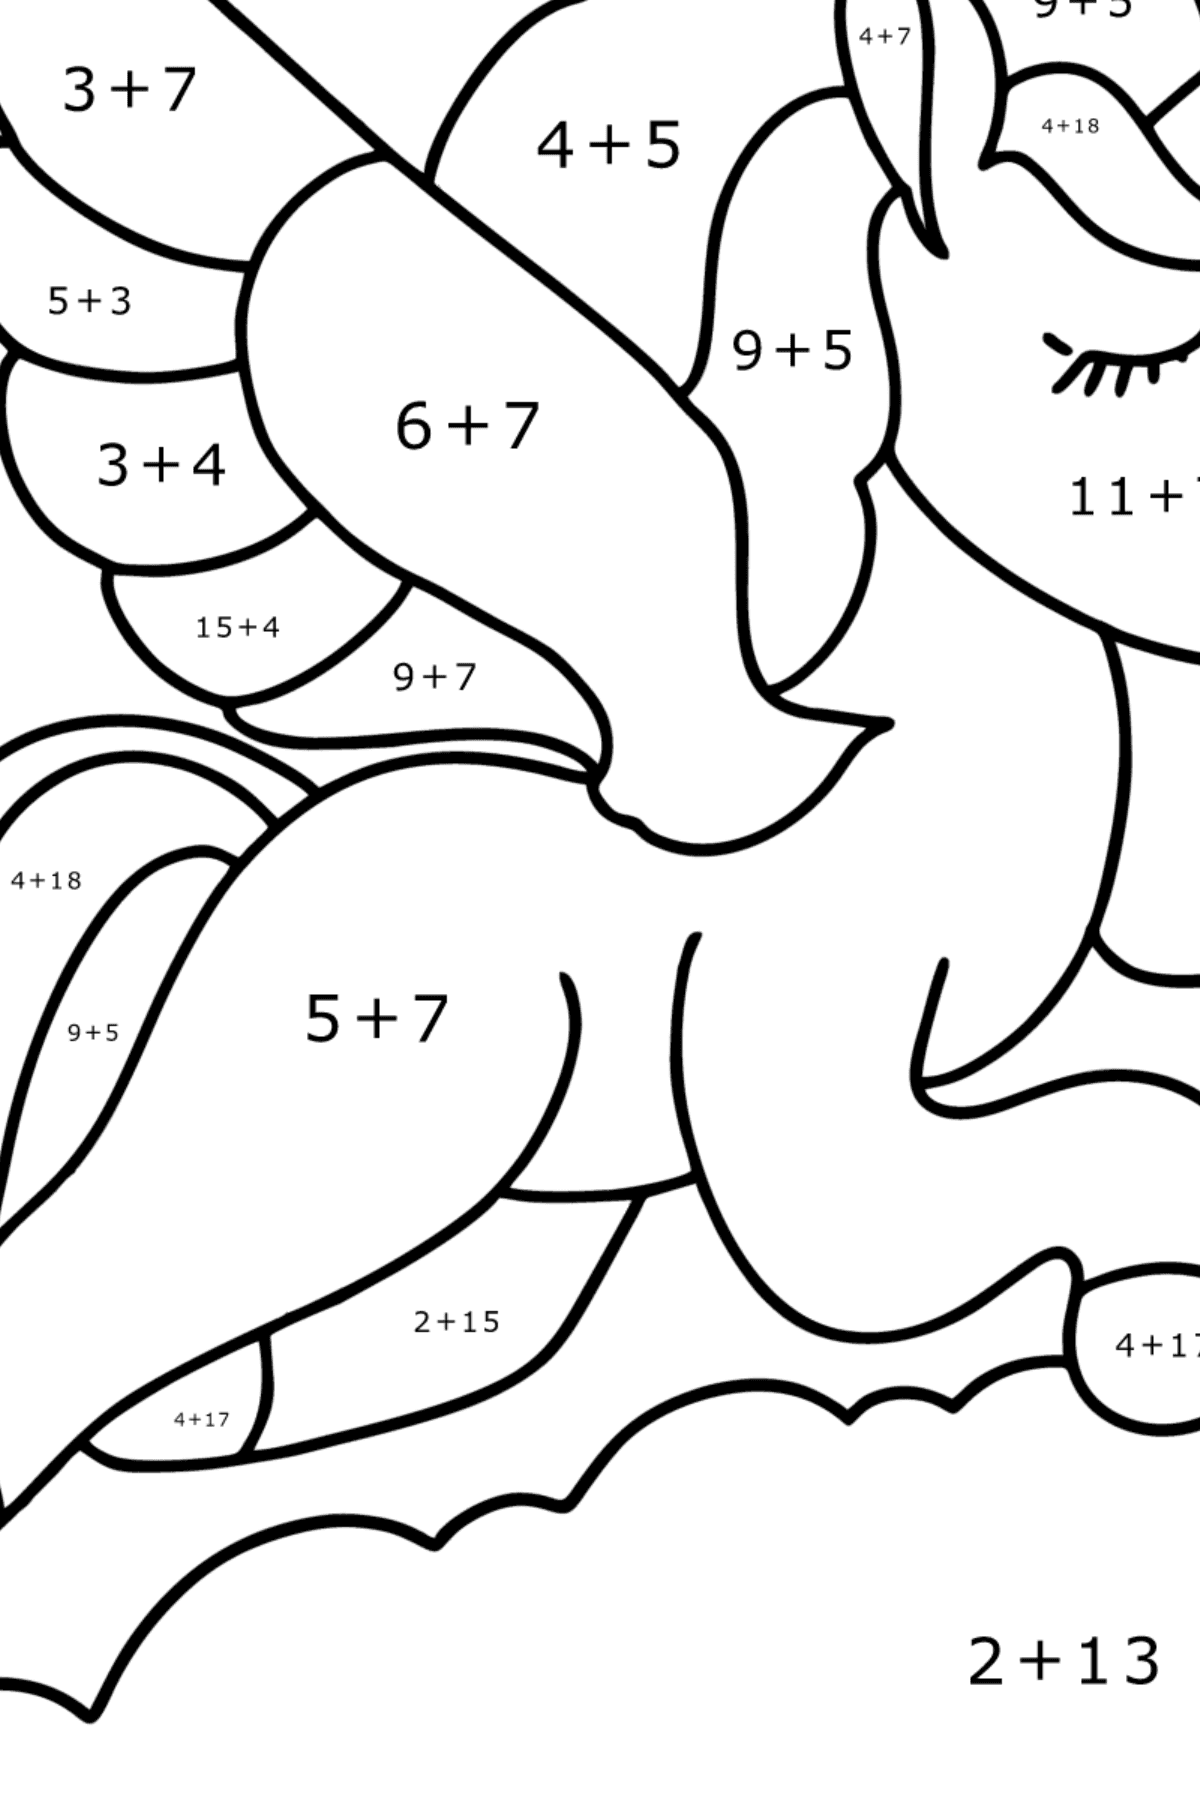 Unicorn with wings coloring page - Math Coloring - Addition for Kids